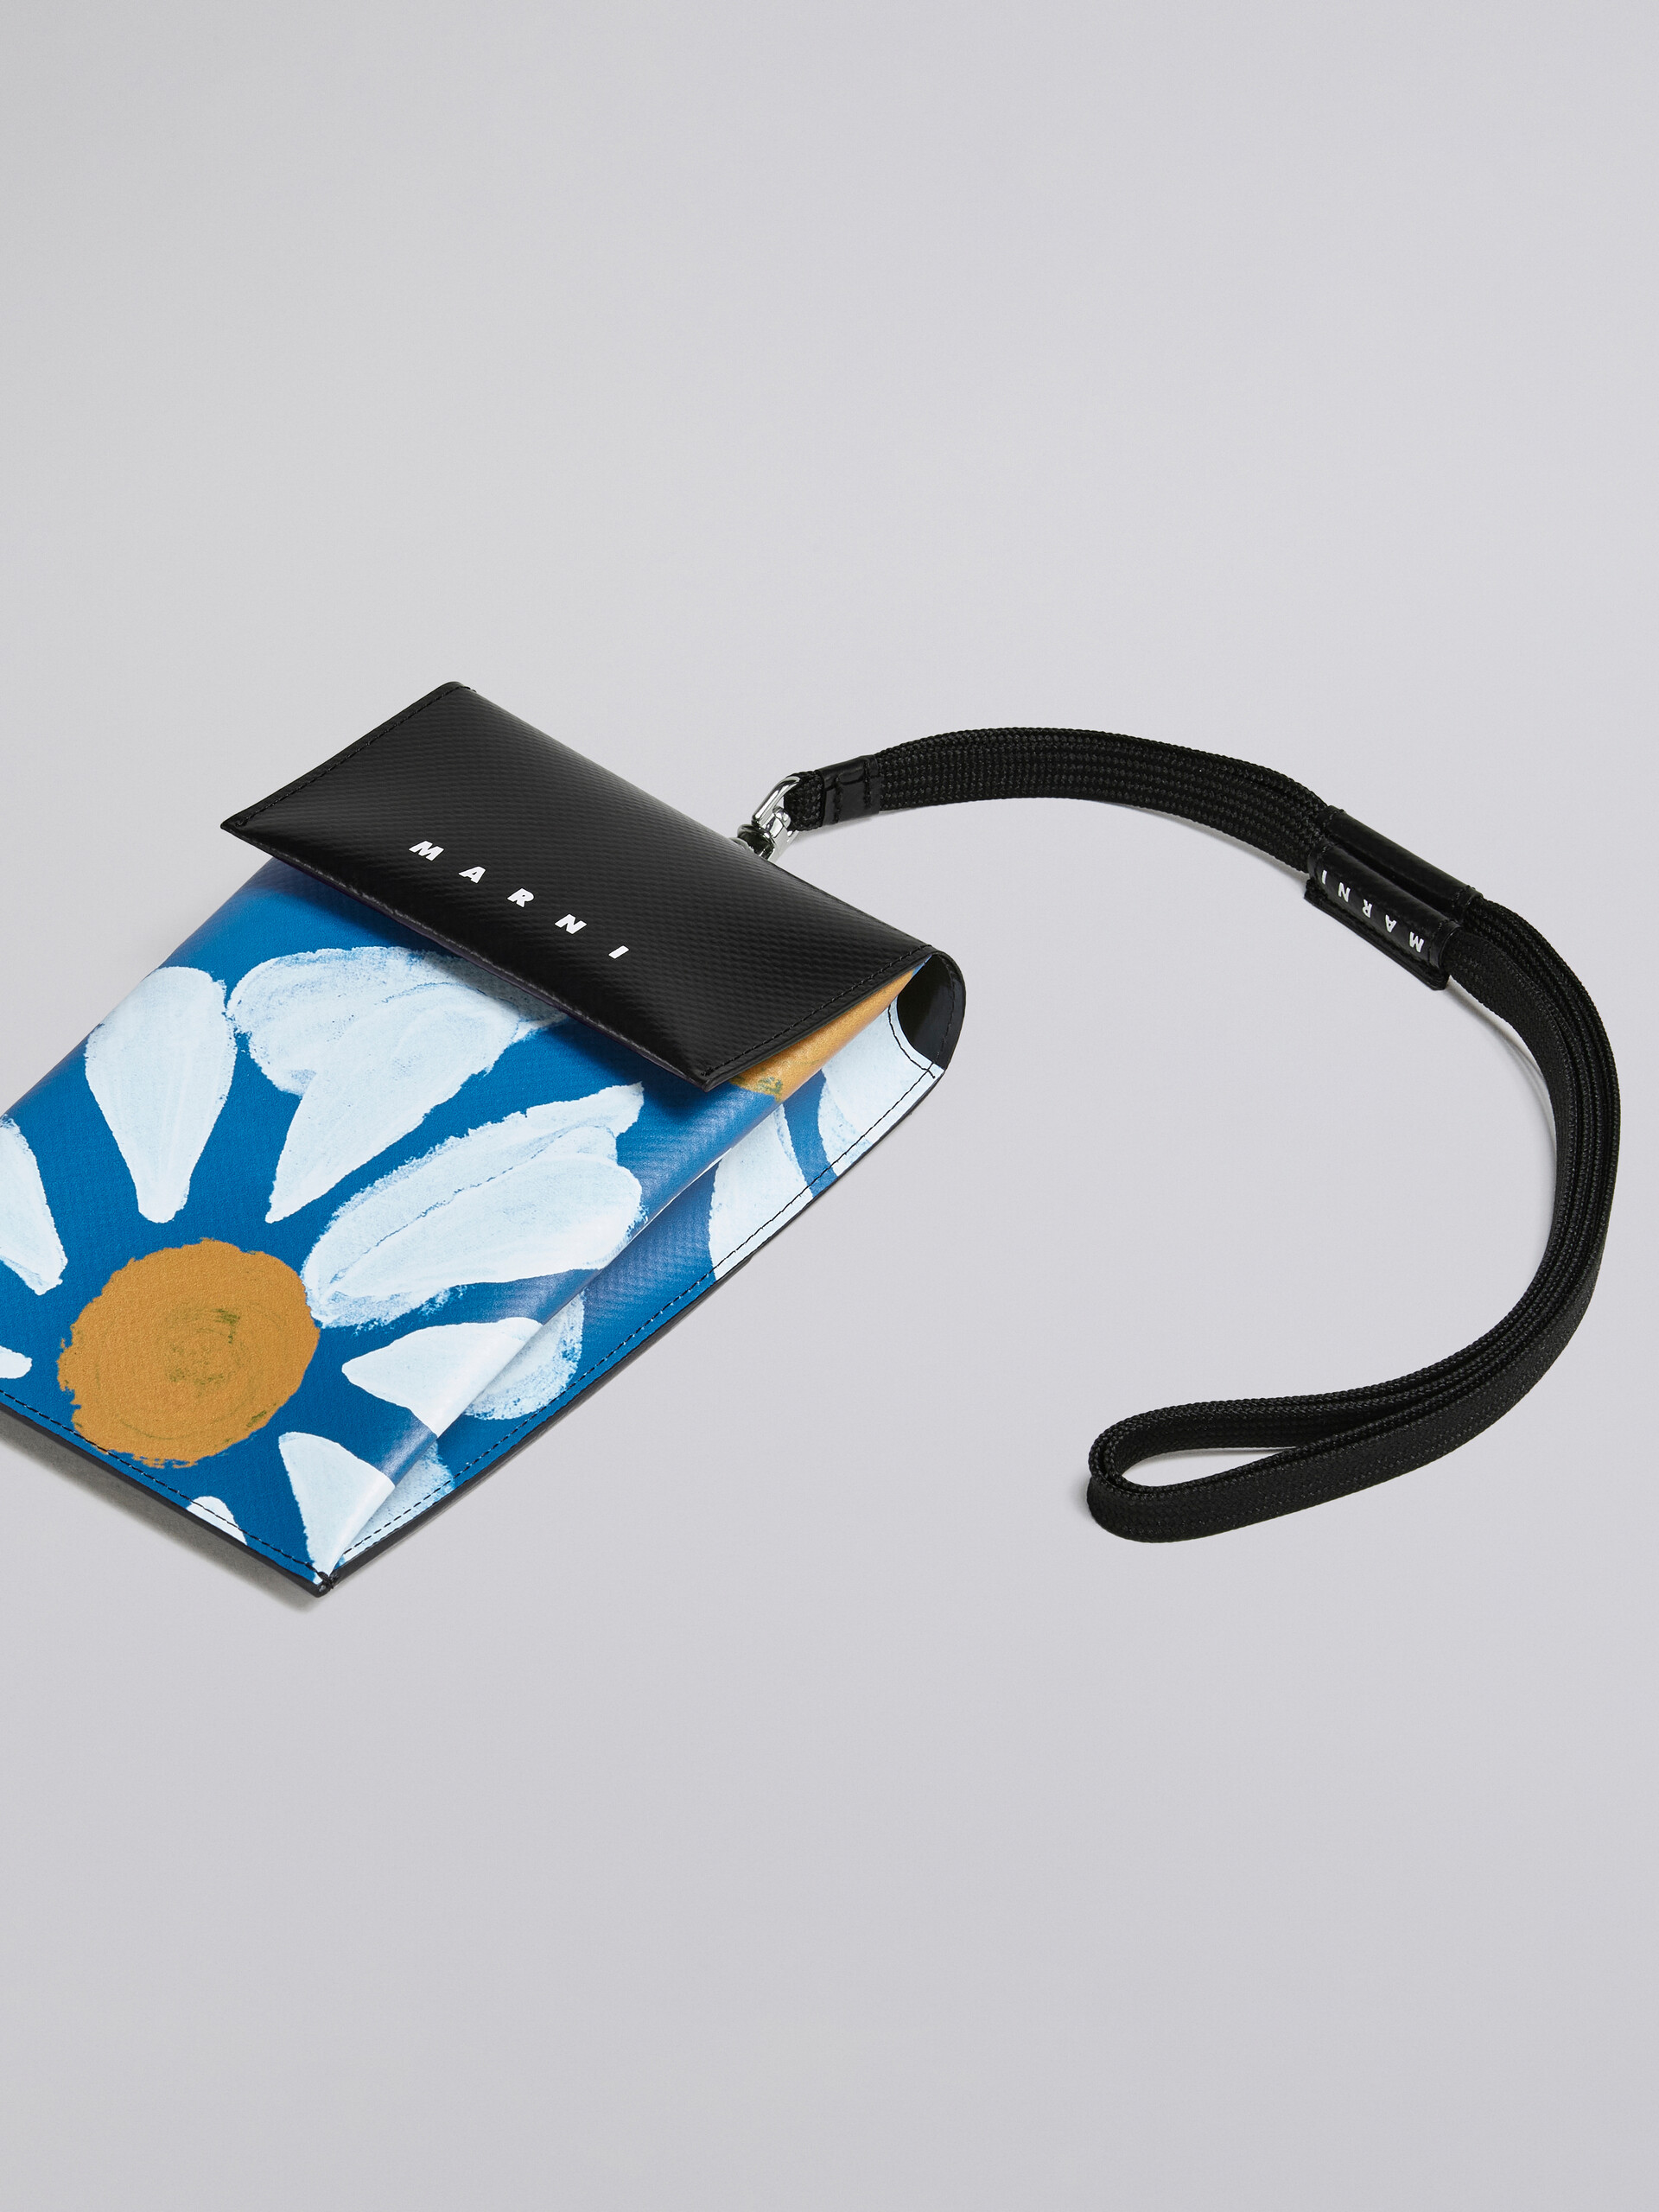 Euphoria print phone case - Wallets and Small Leather Goods - Image 4